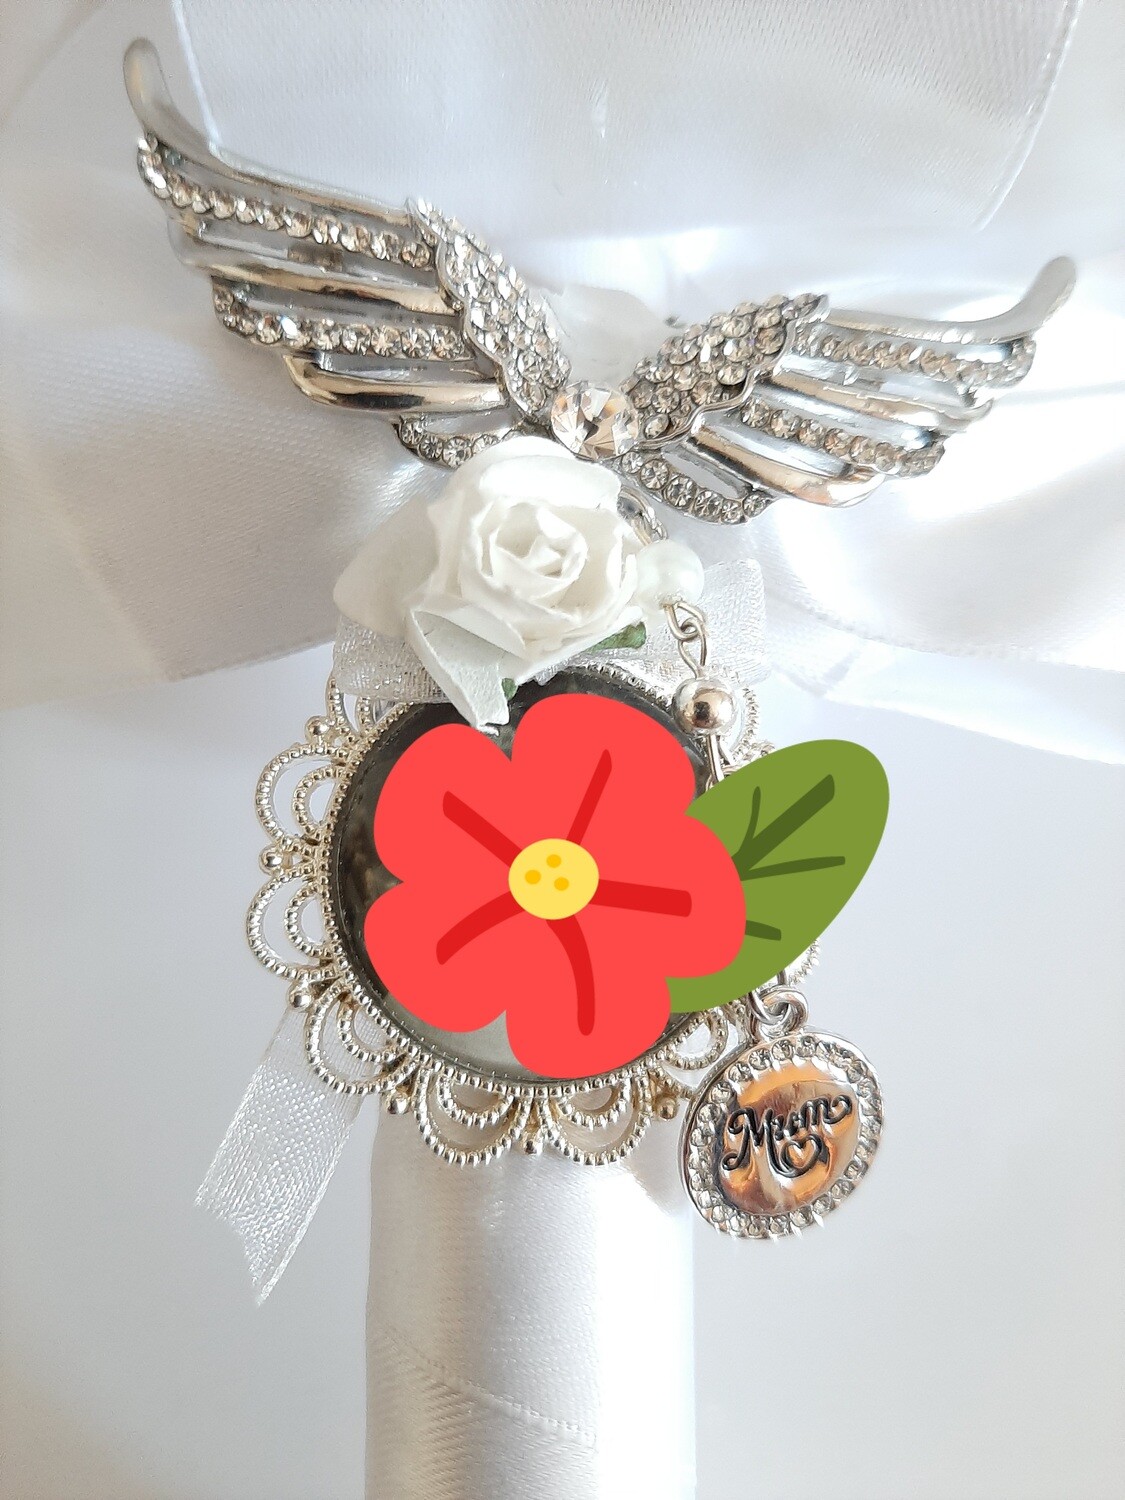 "Missed" - Angel Wing Bouquet Pin